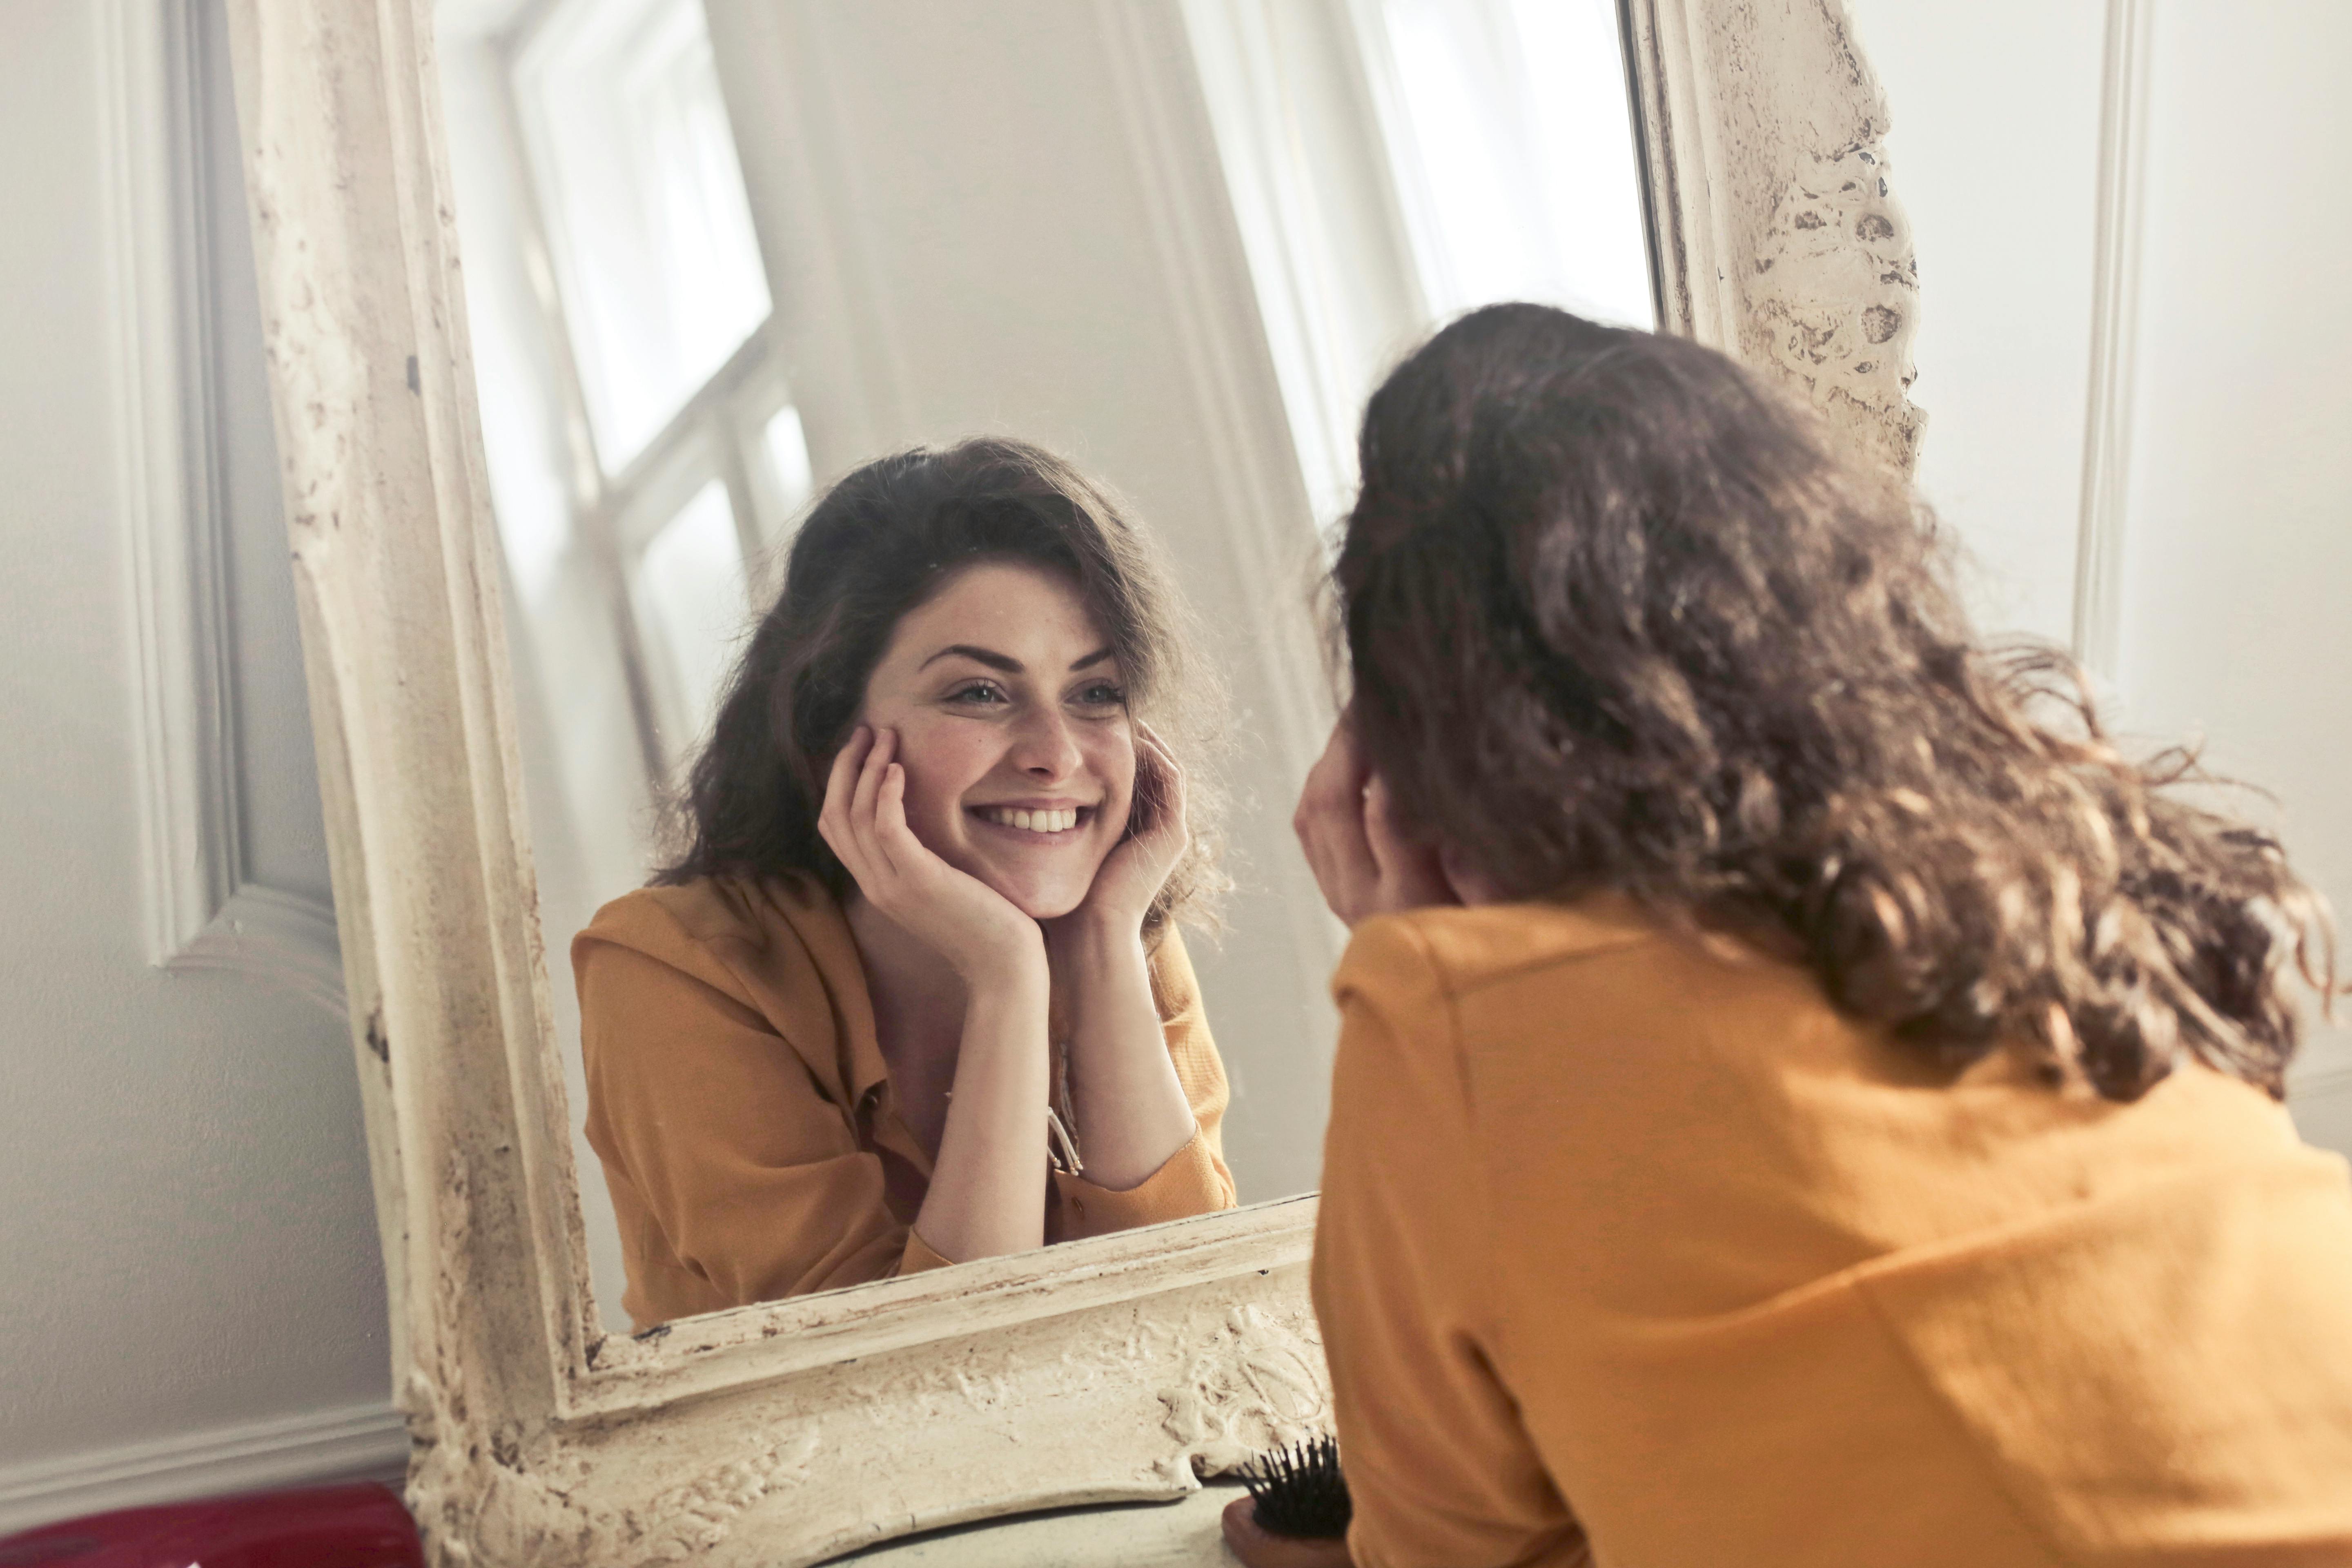 A woman smiling while looking at her reflection in a mirror | Source: Pexels